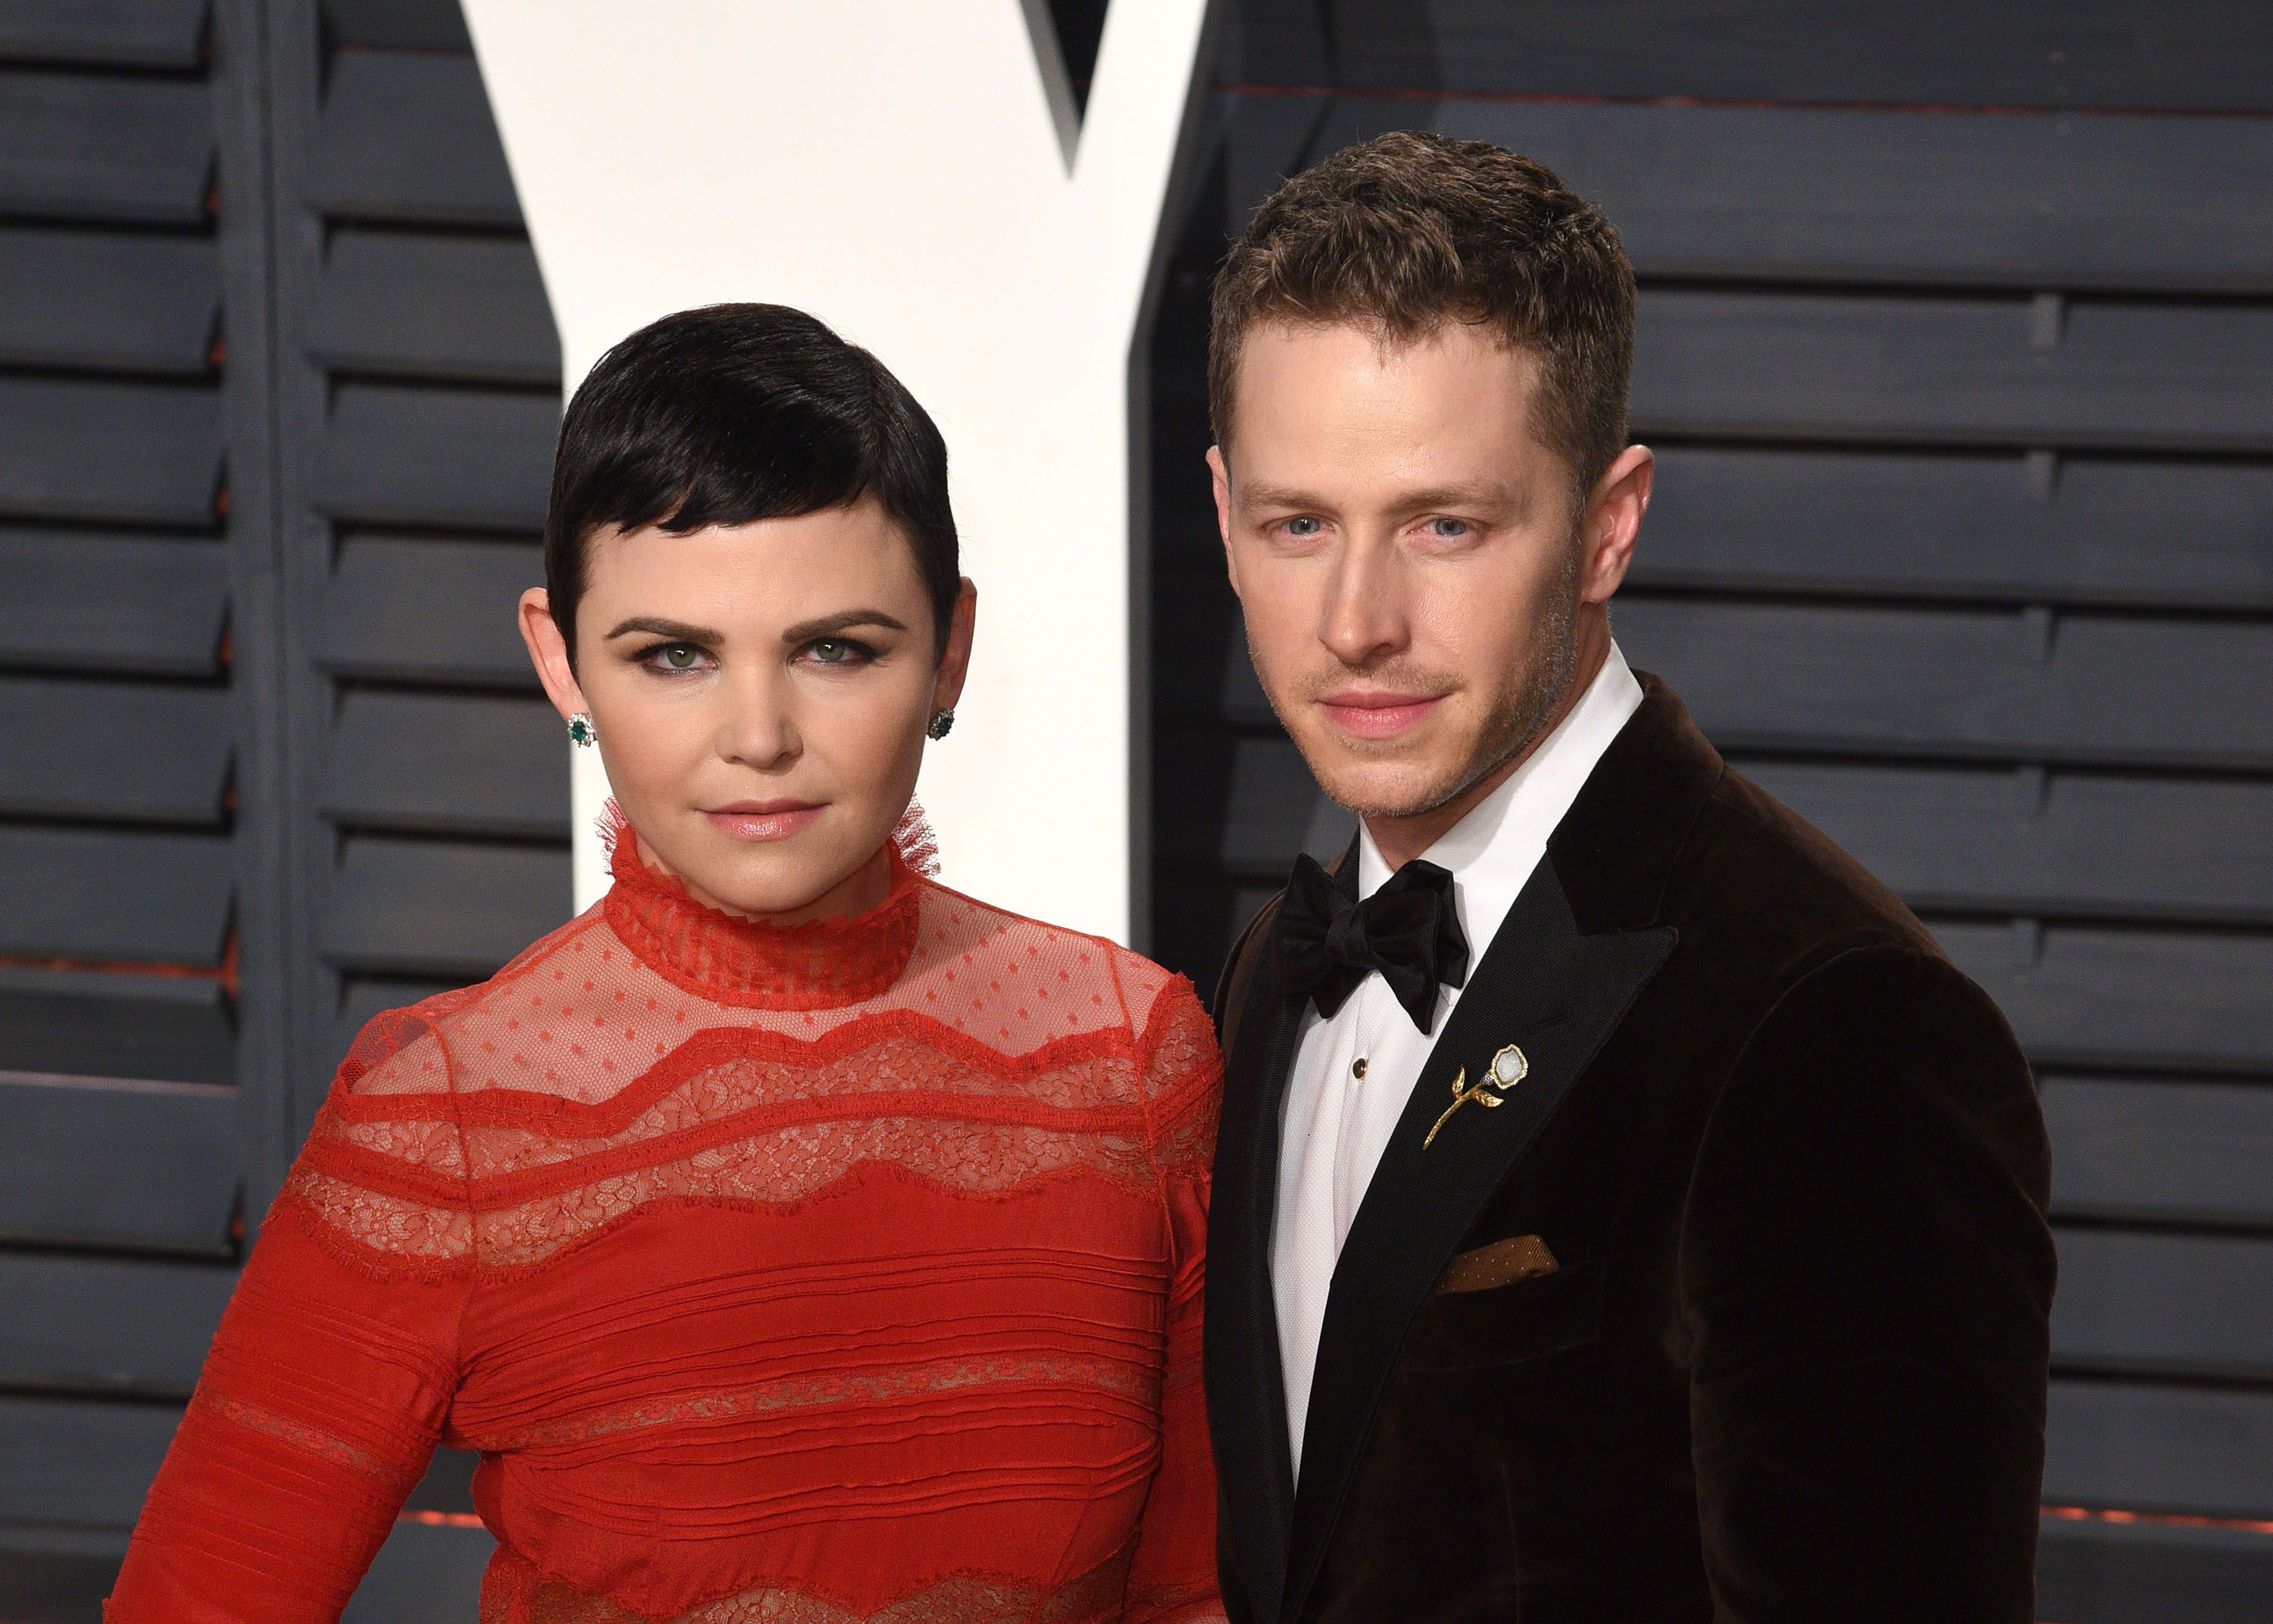 Ginnifer Goodwin and Josh Dallas during the 2017 Vanity Fair Oscar Party Hosted By Graydon Carter at Wallis Annenberg Center for the Performing Arts on February 26, 2017 in Beverly Hills, California. | Source: Getty Images